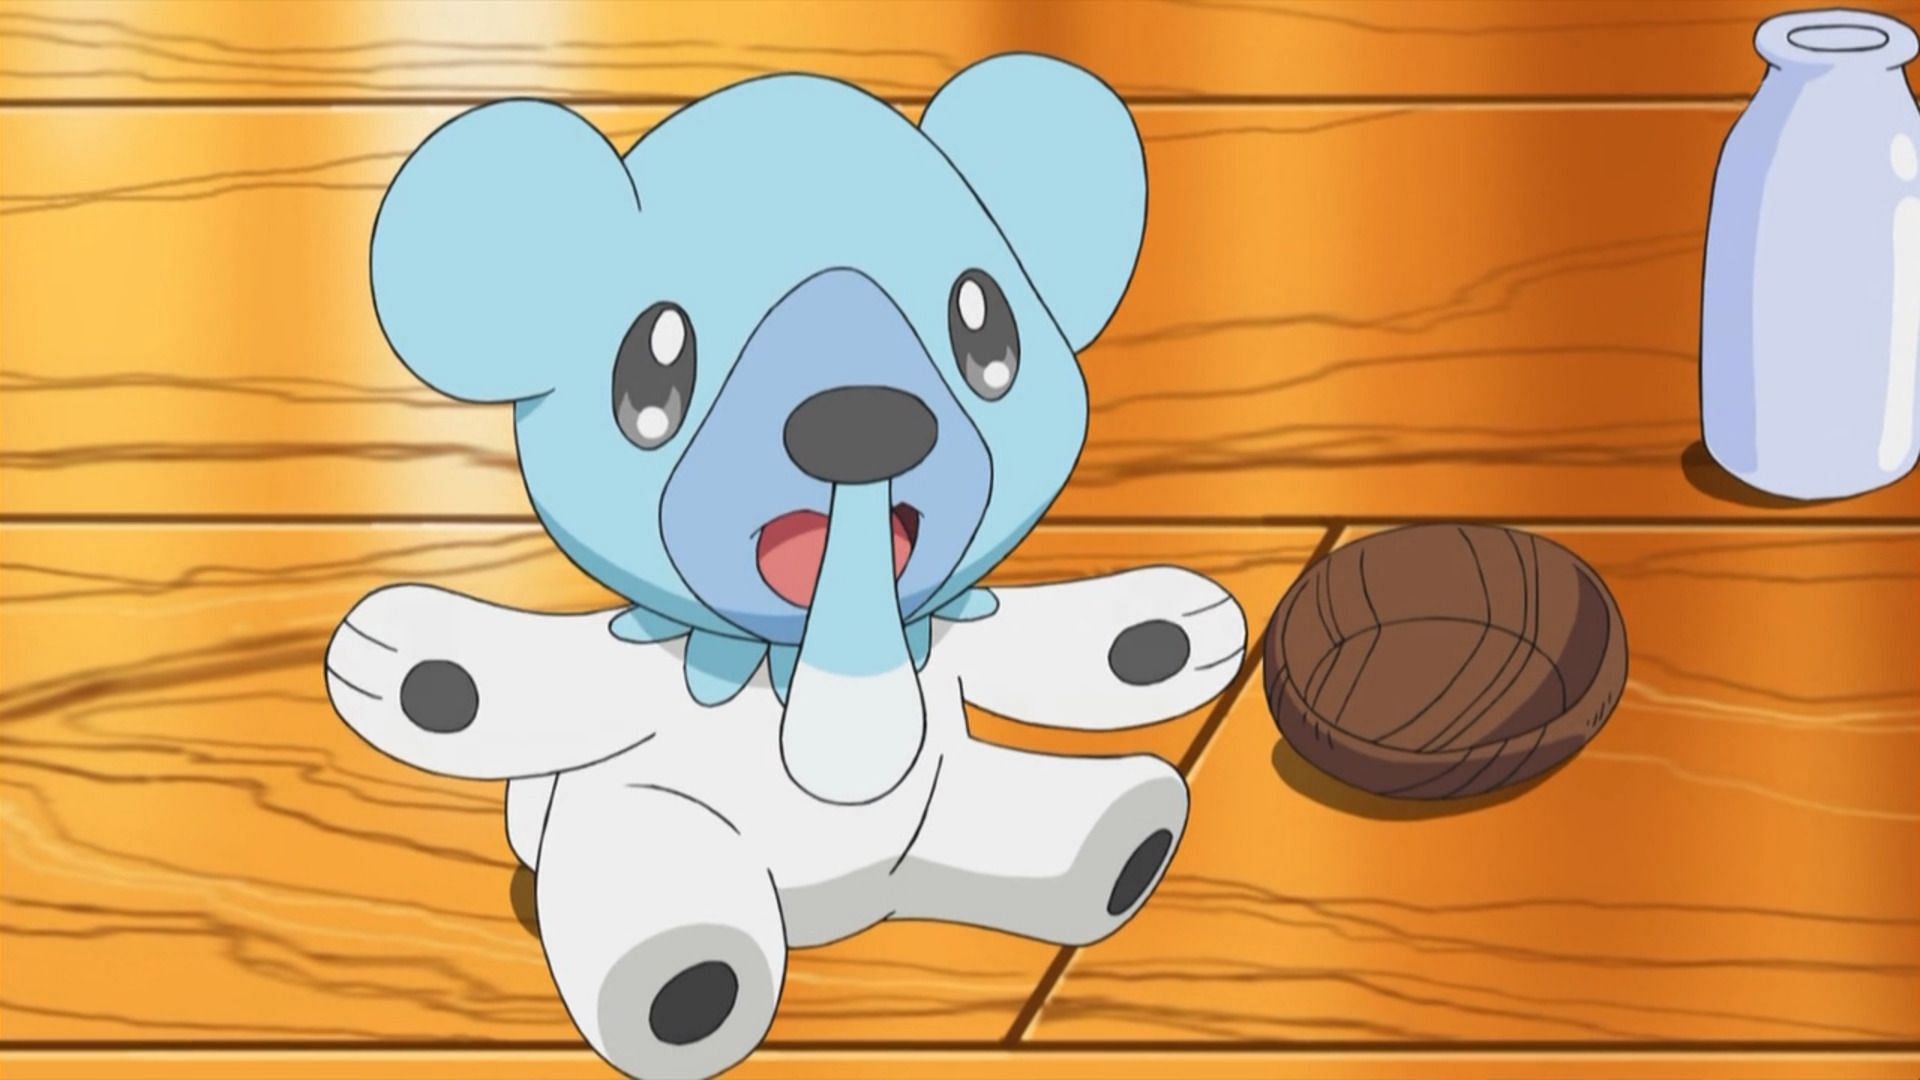 Cubchoo as it appears in the anime (Image via The Pokemon Company)